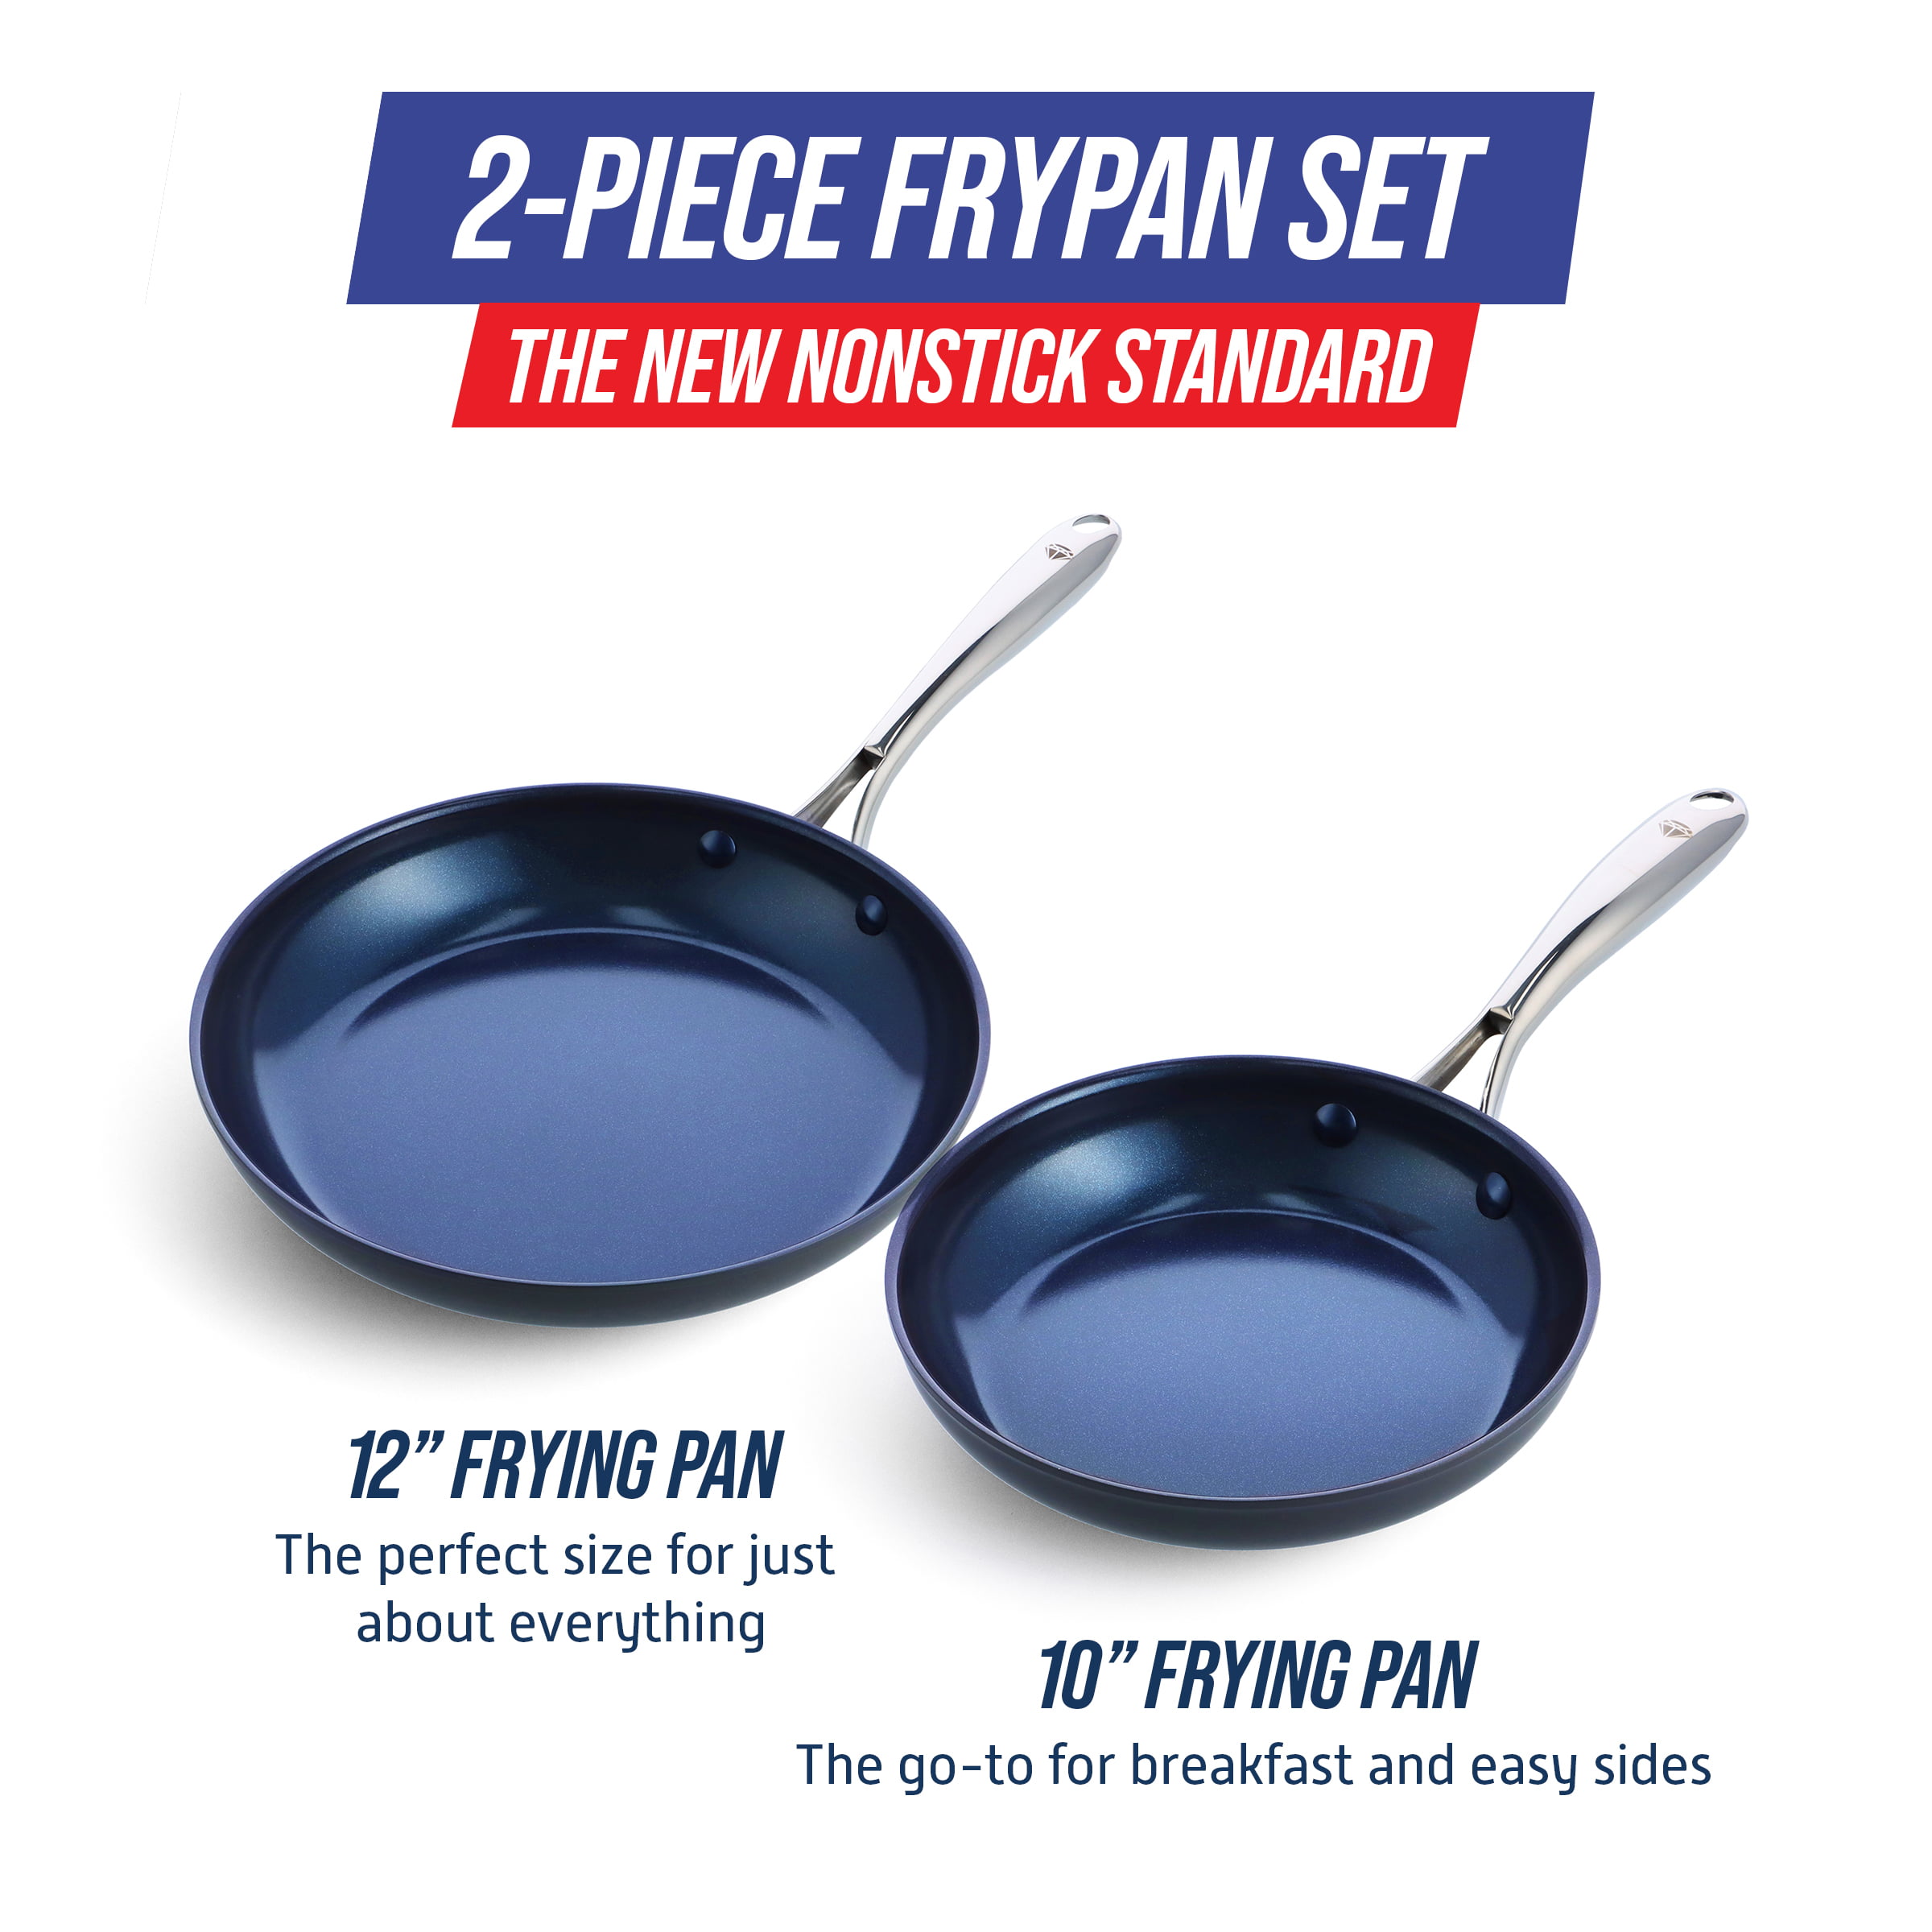 MsMk Frying Pans Nonstick with Lid Blue, 10-Inch Durable Skillet, Titanium and Diamond Non Stick Non-Toxic Coating from USA, Even Heating, Easy